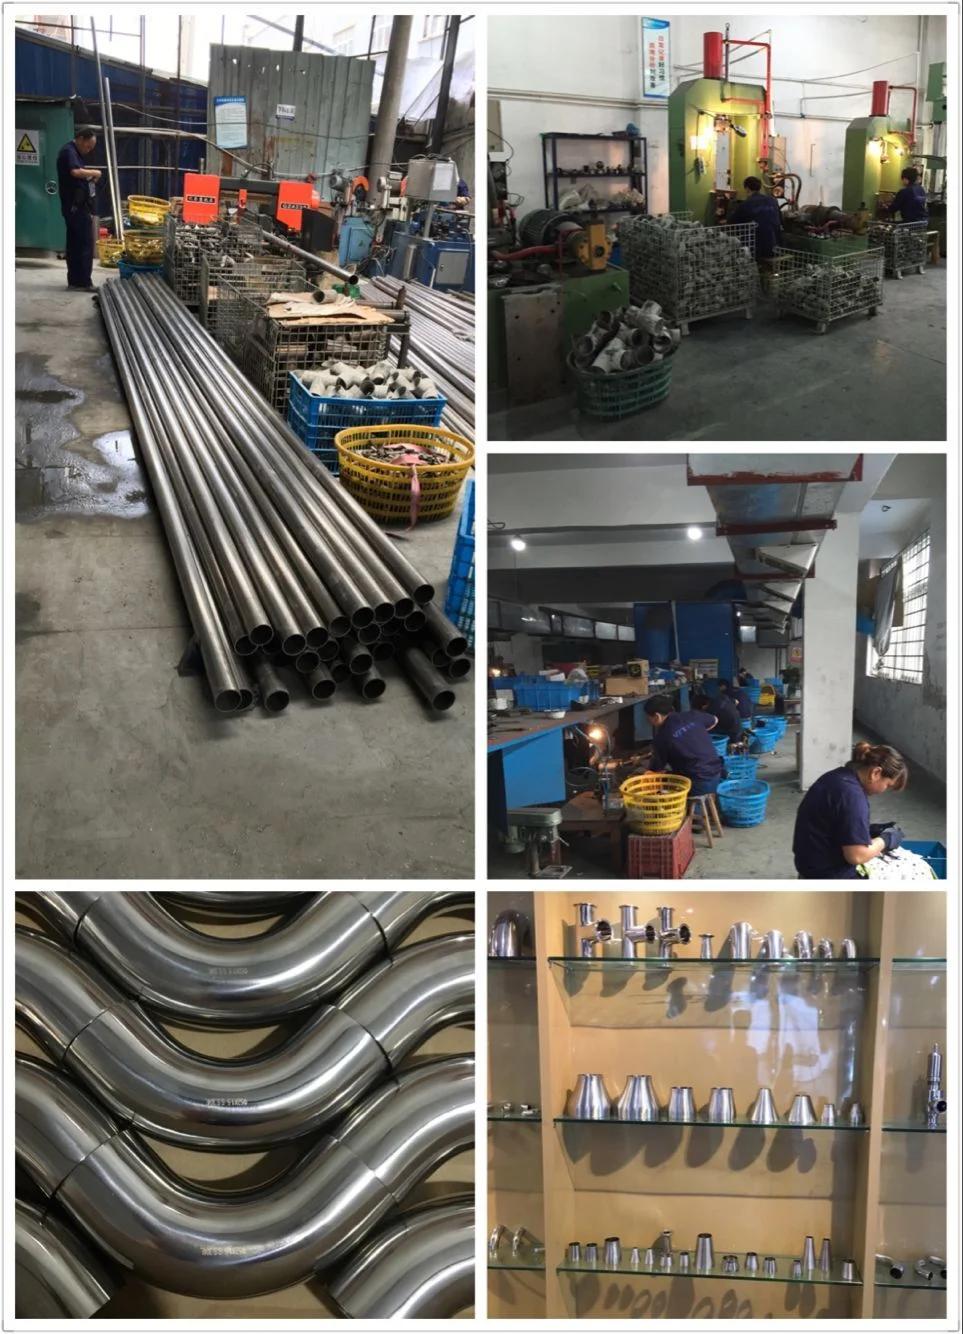 Sanitary Stainless Steel Angle Filter with Clamp End